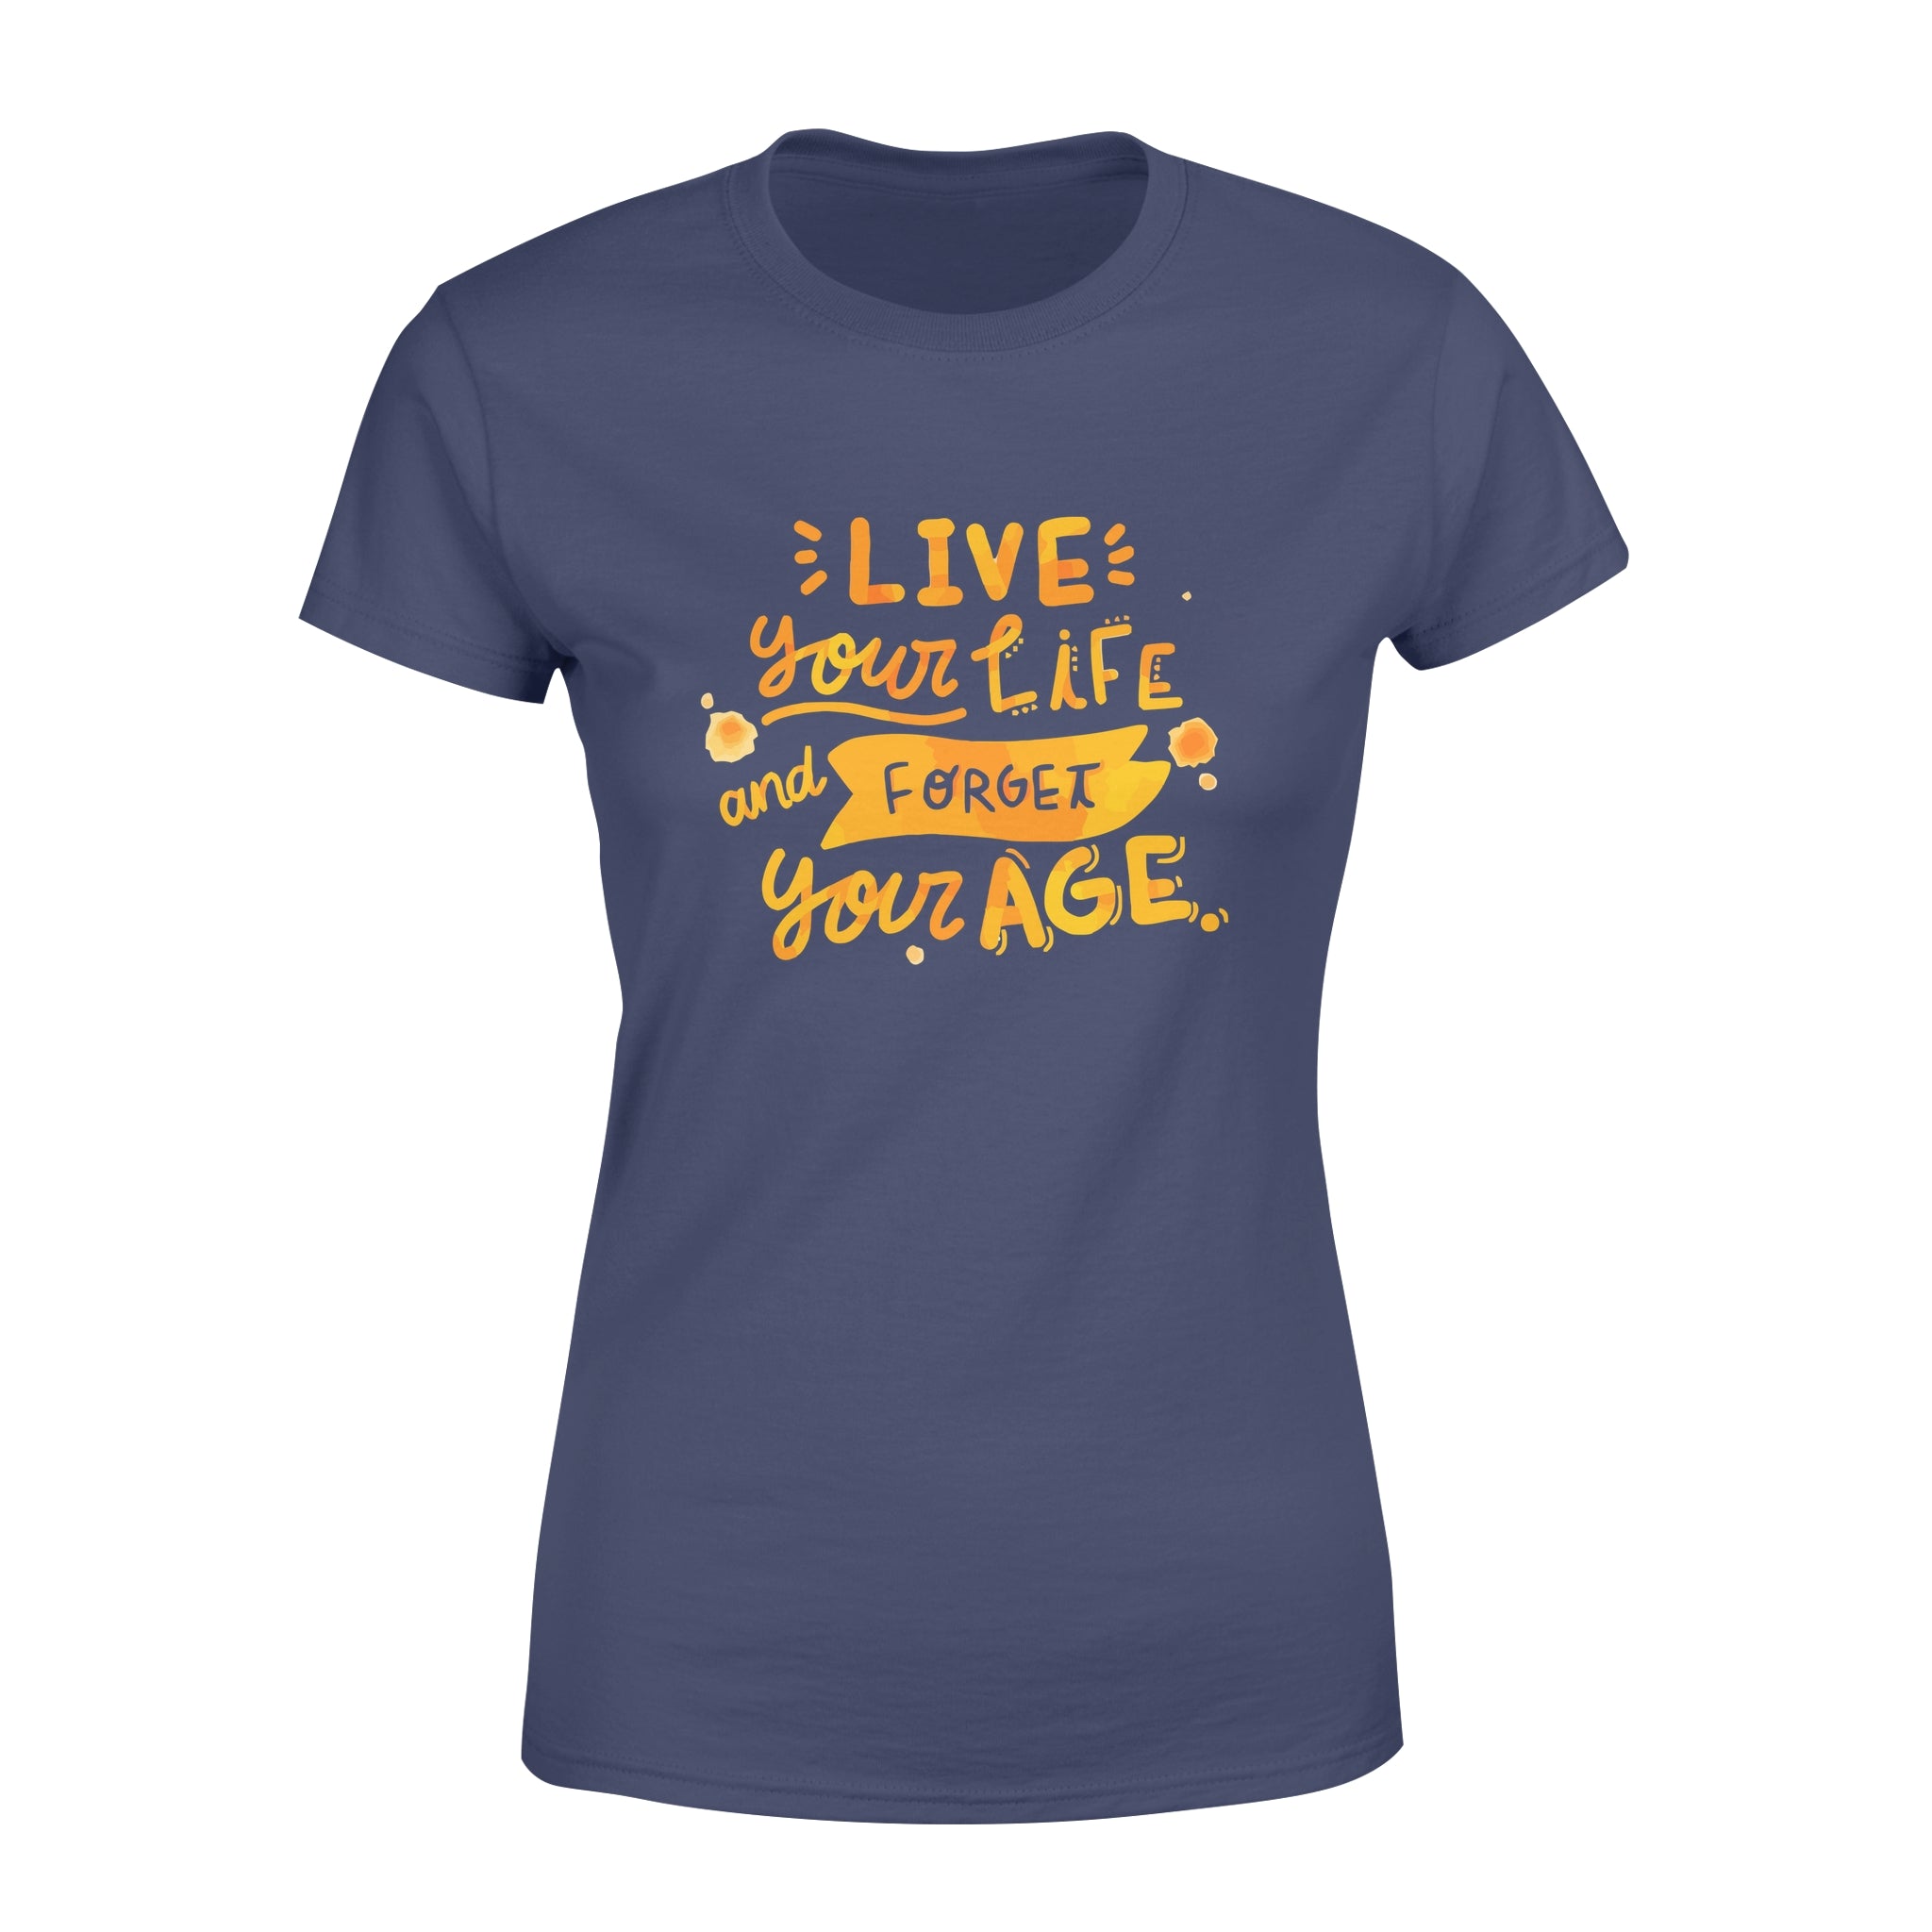 Live Your Life and Forget Your Age - Women's T-shirt